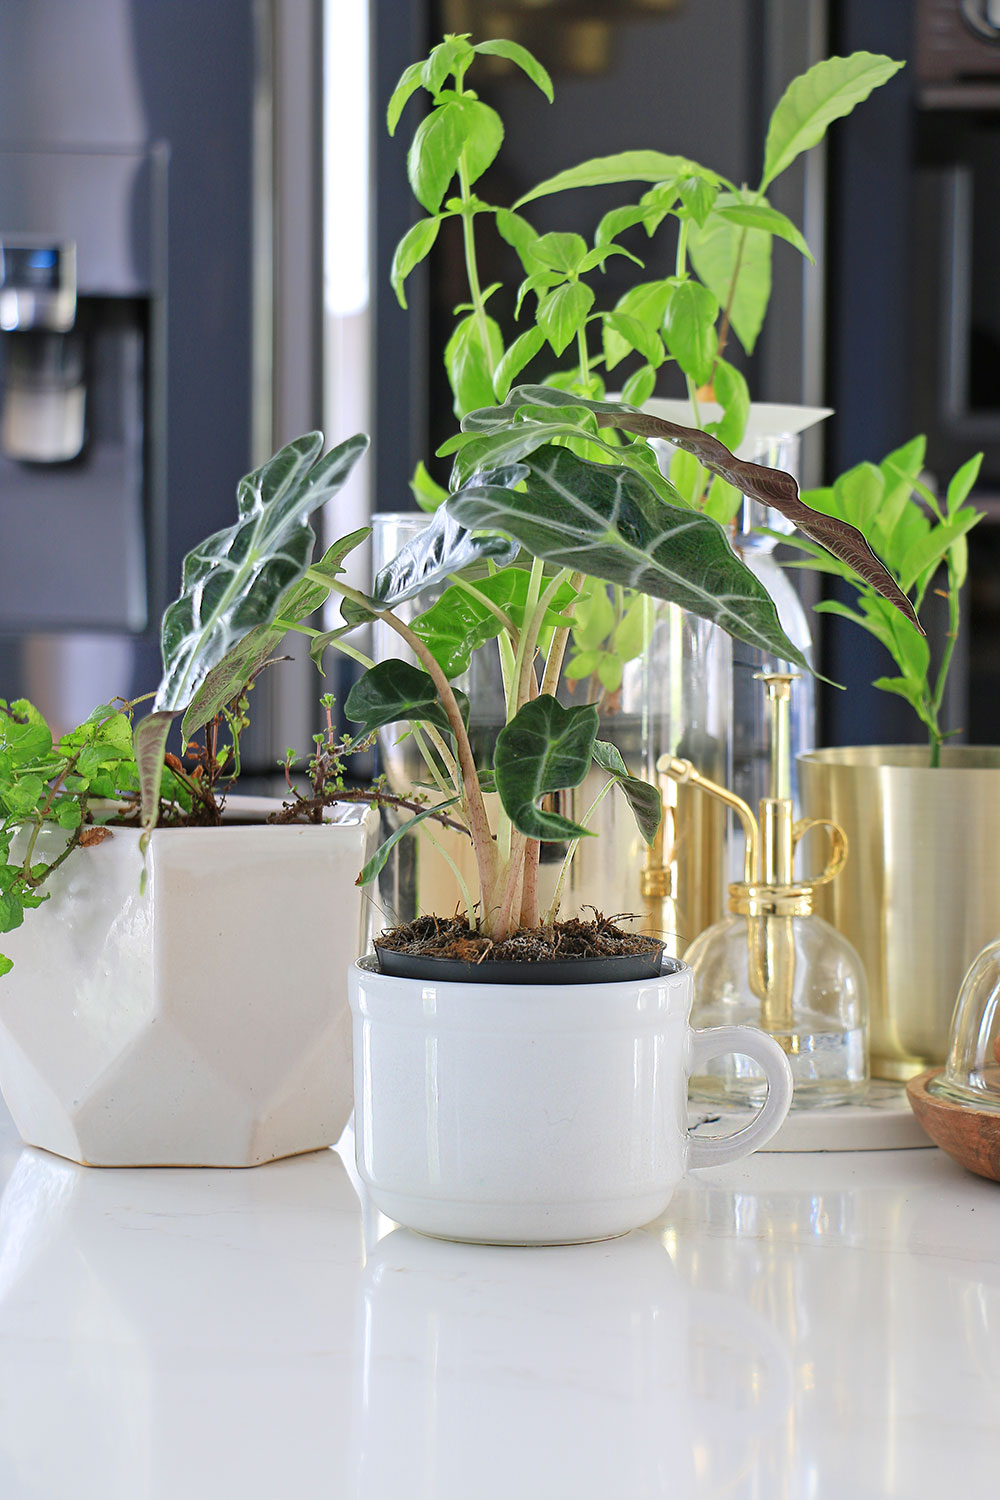 Potted-plants-on-countertop